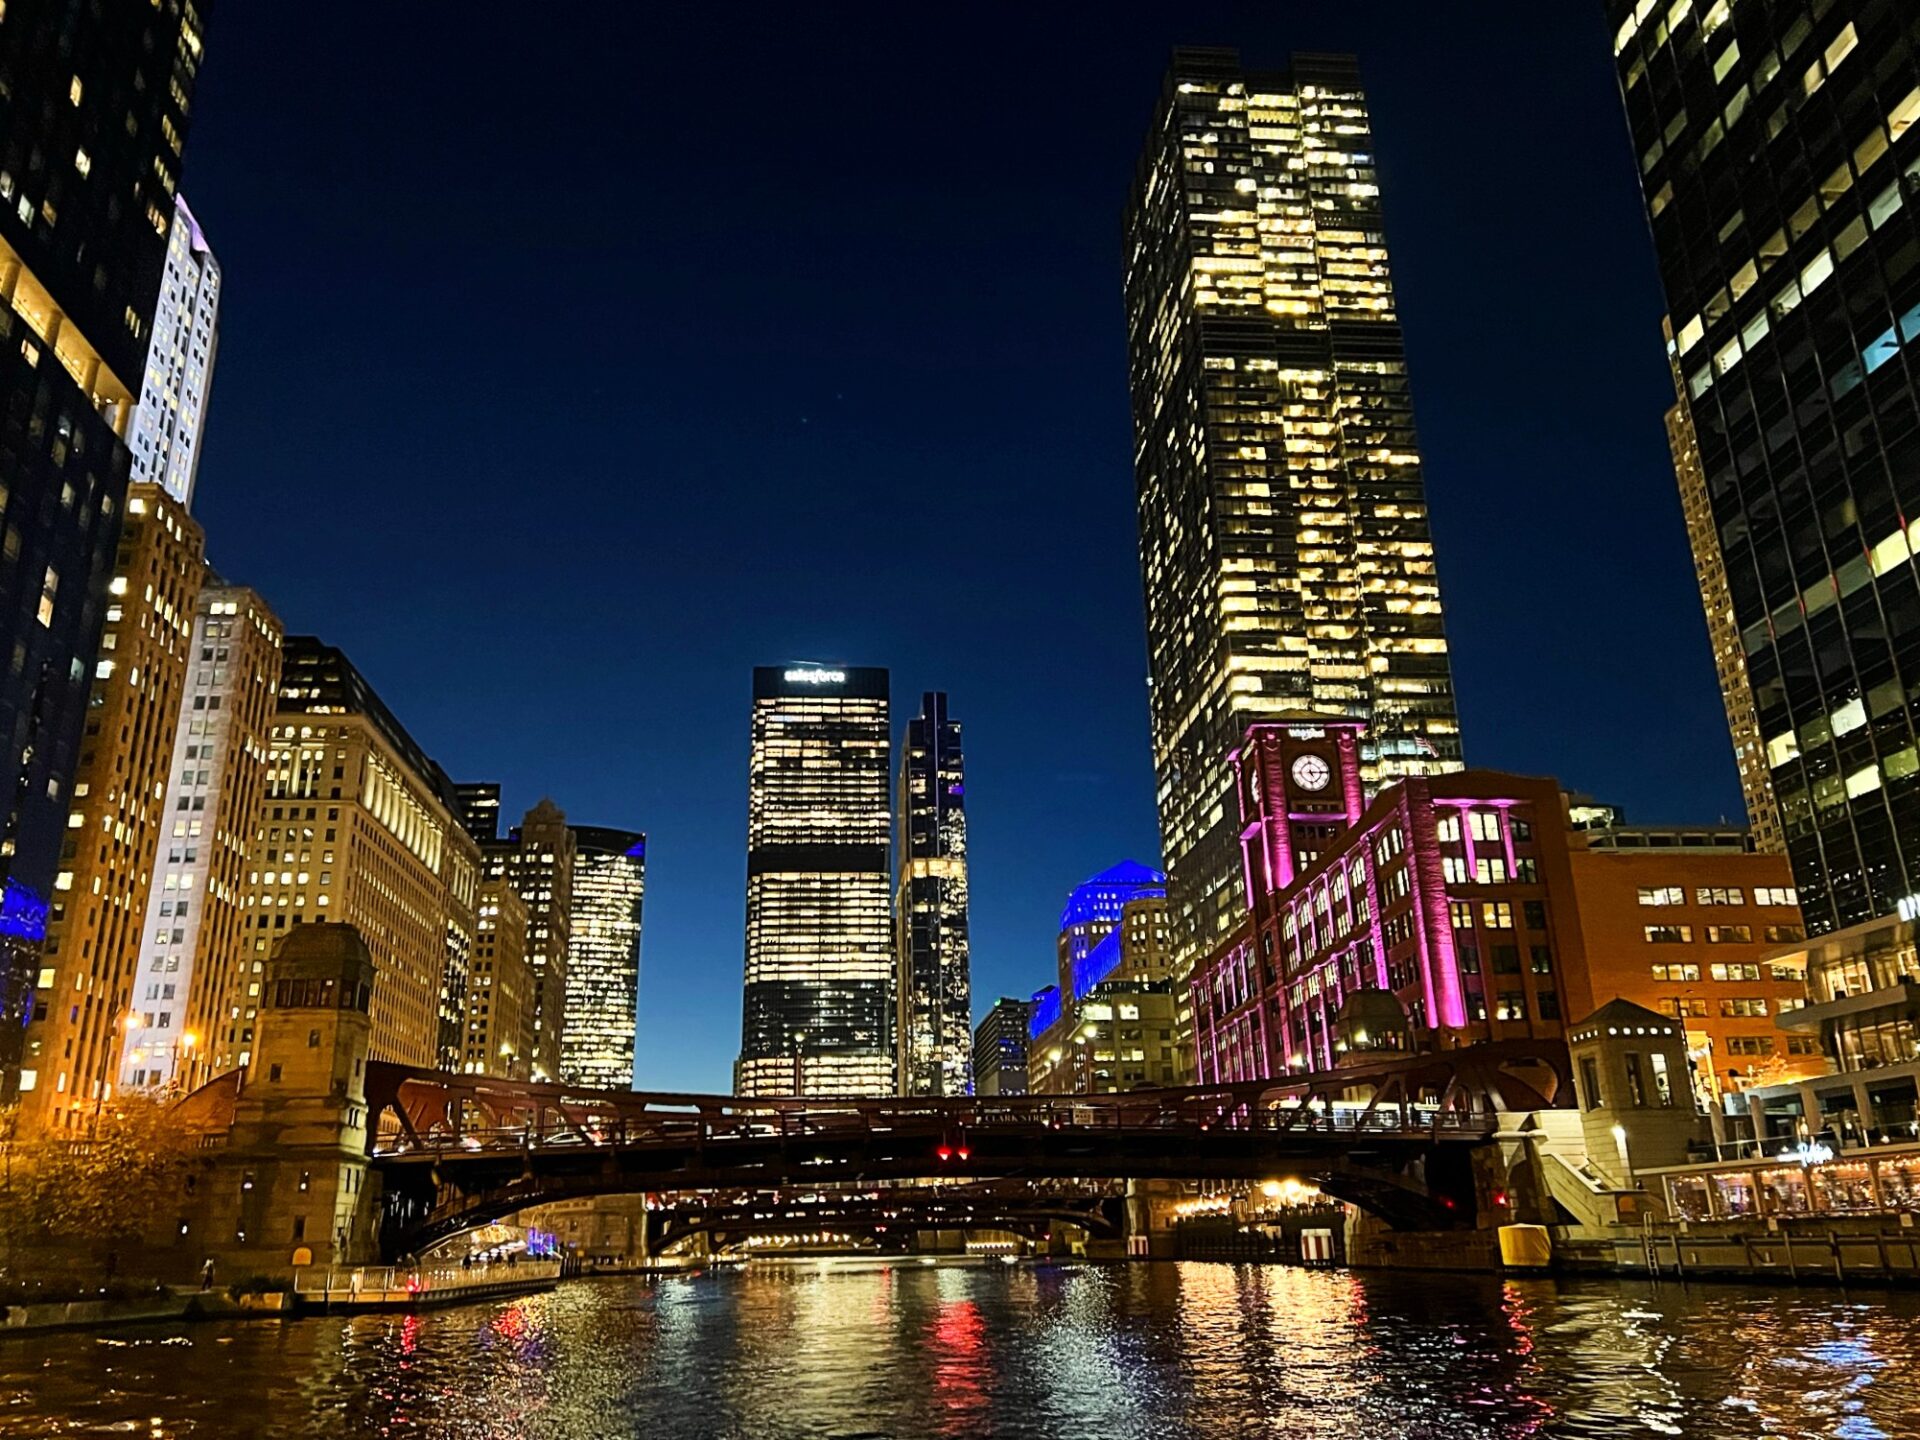 8 Things to Do in Chicago: How to Spend an Awesome Weekend in the Windy City